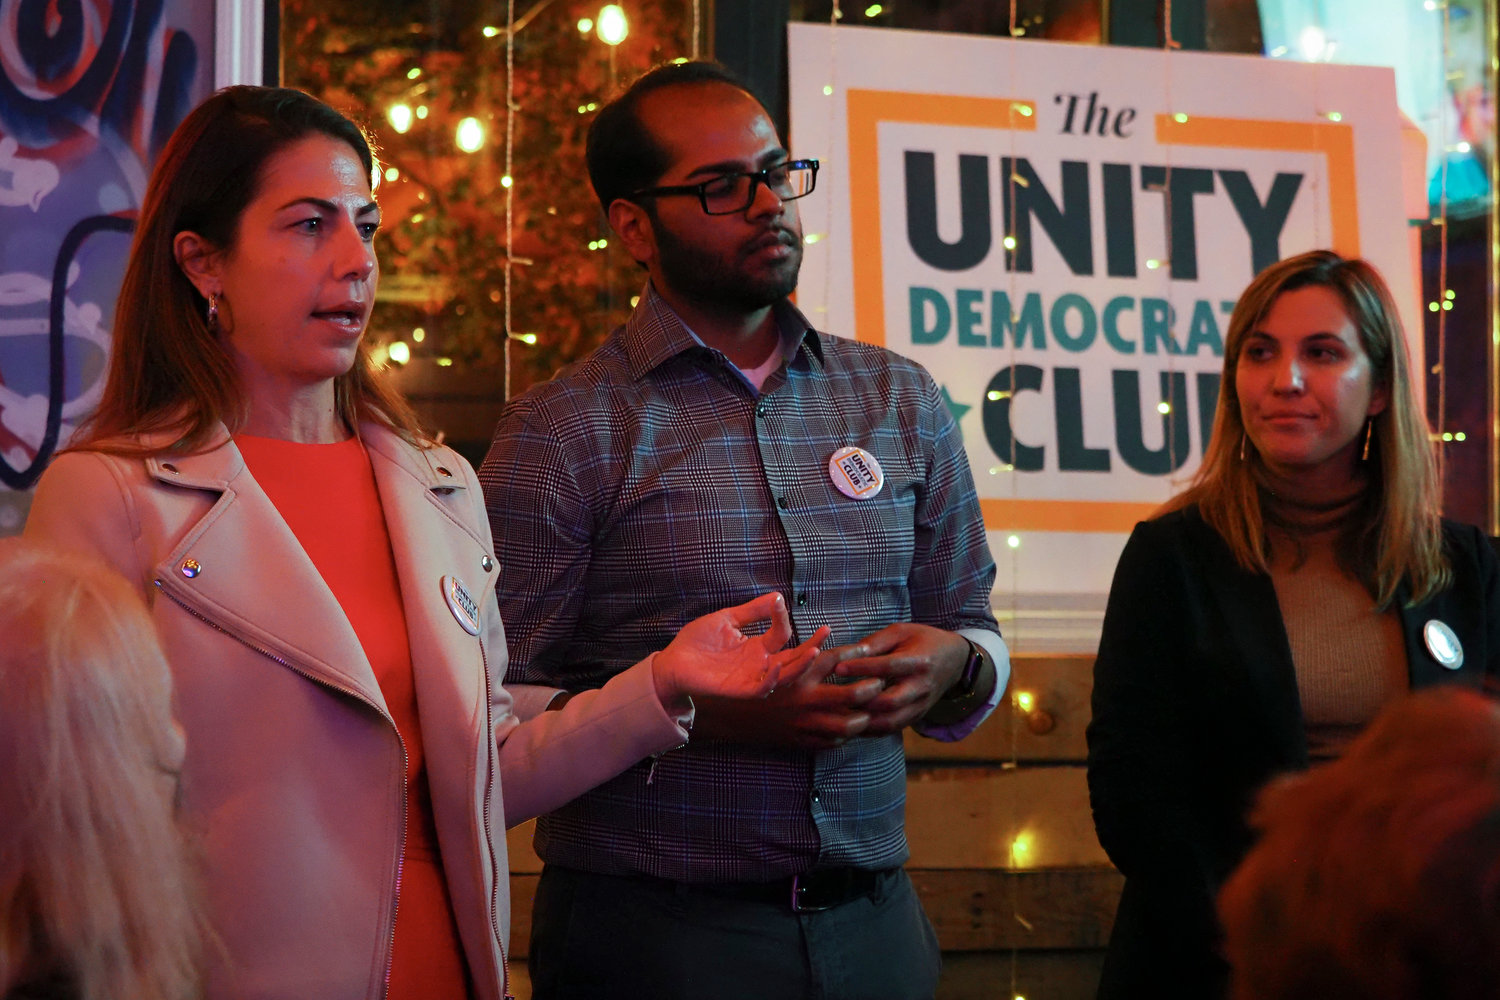 District leaders — Abigail Martin and Ramdat Singh — and state committeewoman Morgan Evers ran as a slate in this year’s June election centered around energizing the Democratic party’s base in the area. Now they have a political club to do just that.